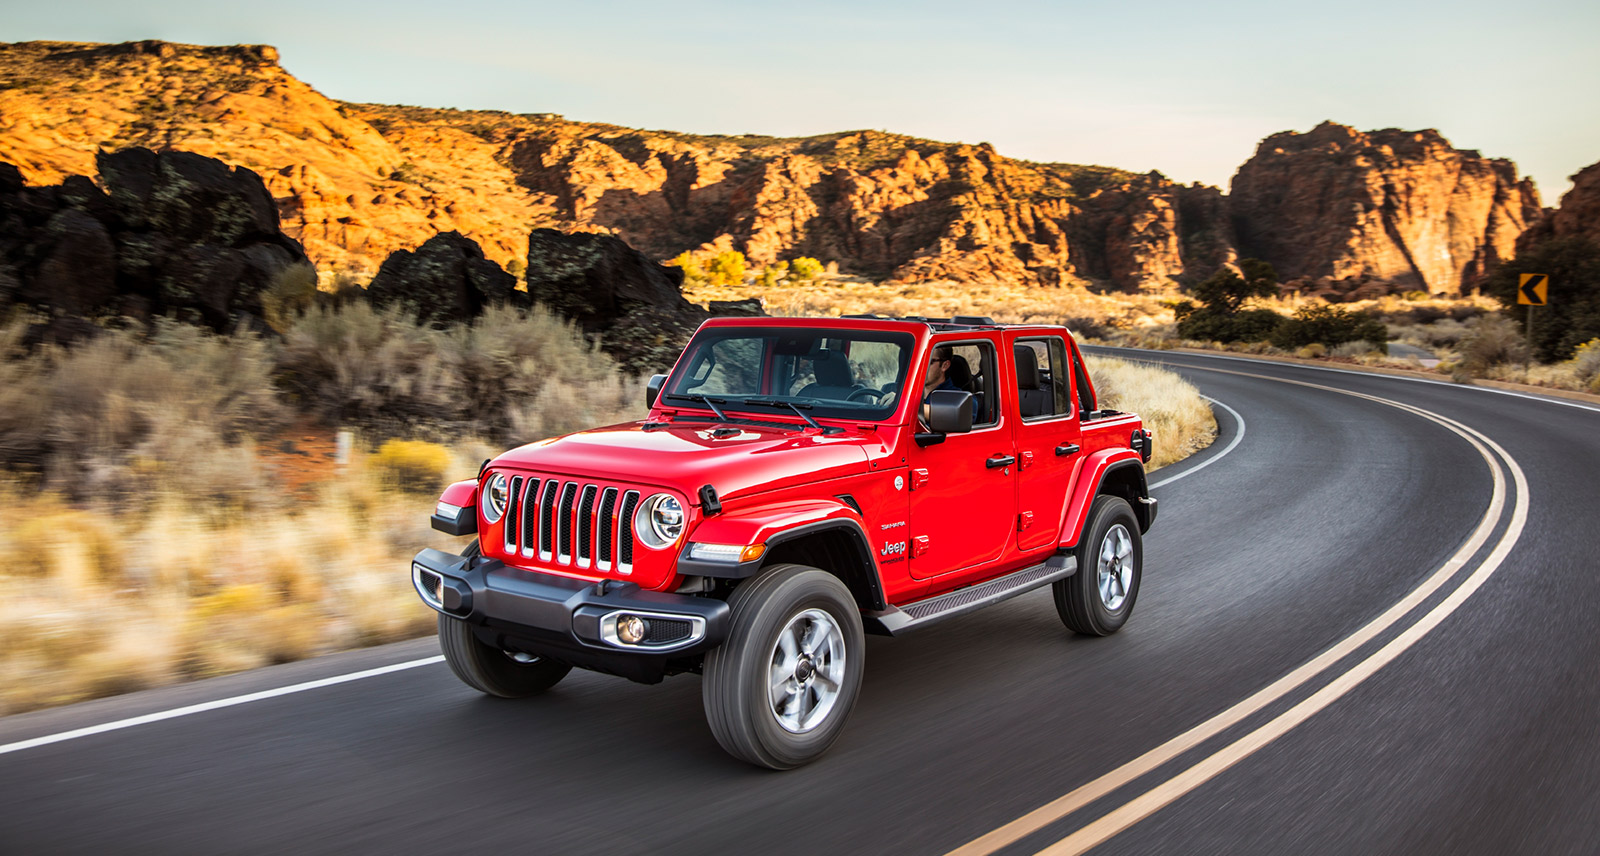 5 Things You Need To Know: Jeep Wrangler Unlimited Sahara - Sharp Magazine